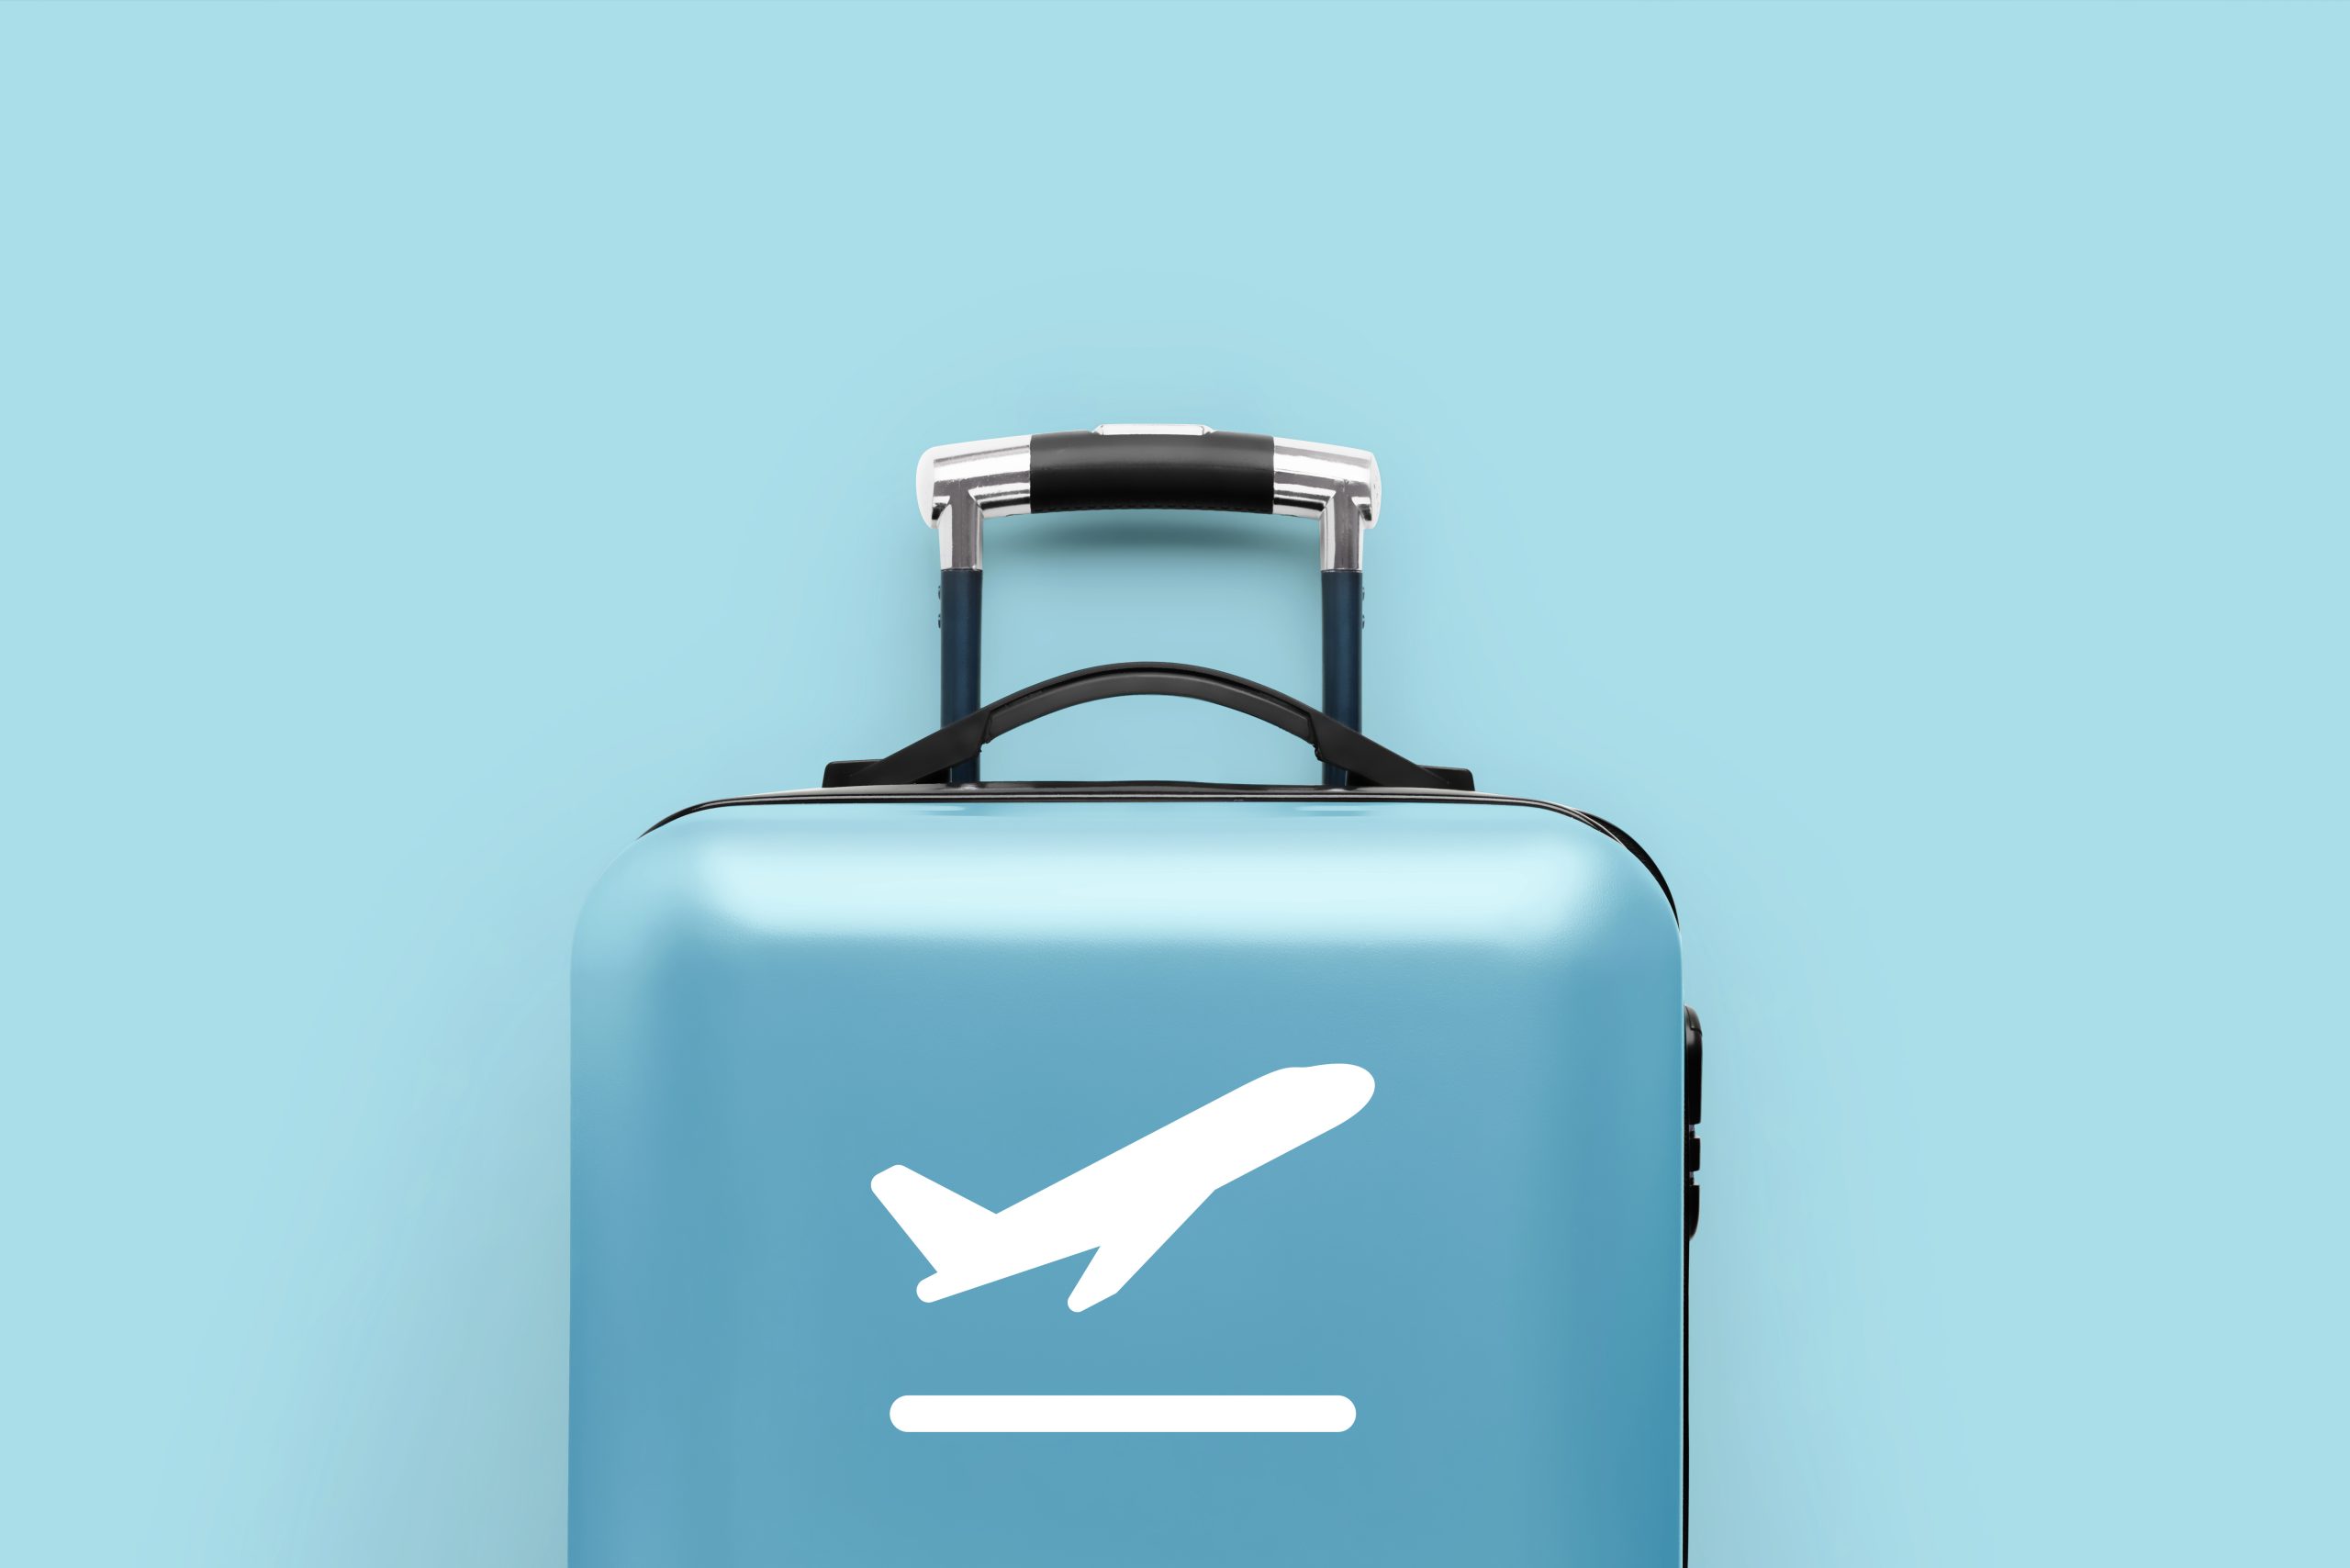 Luggage with airplane icon